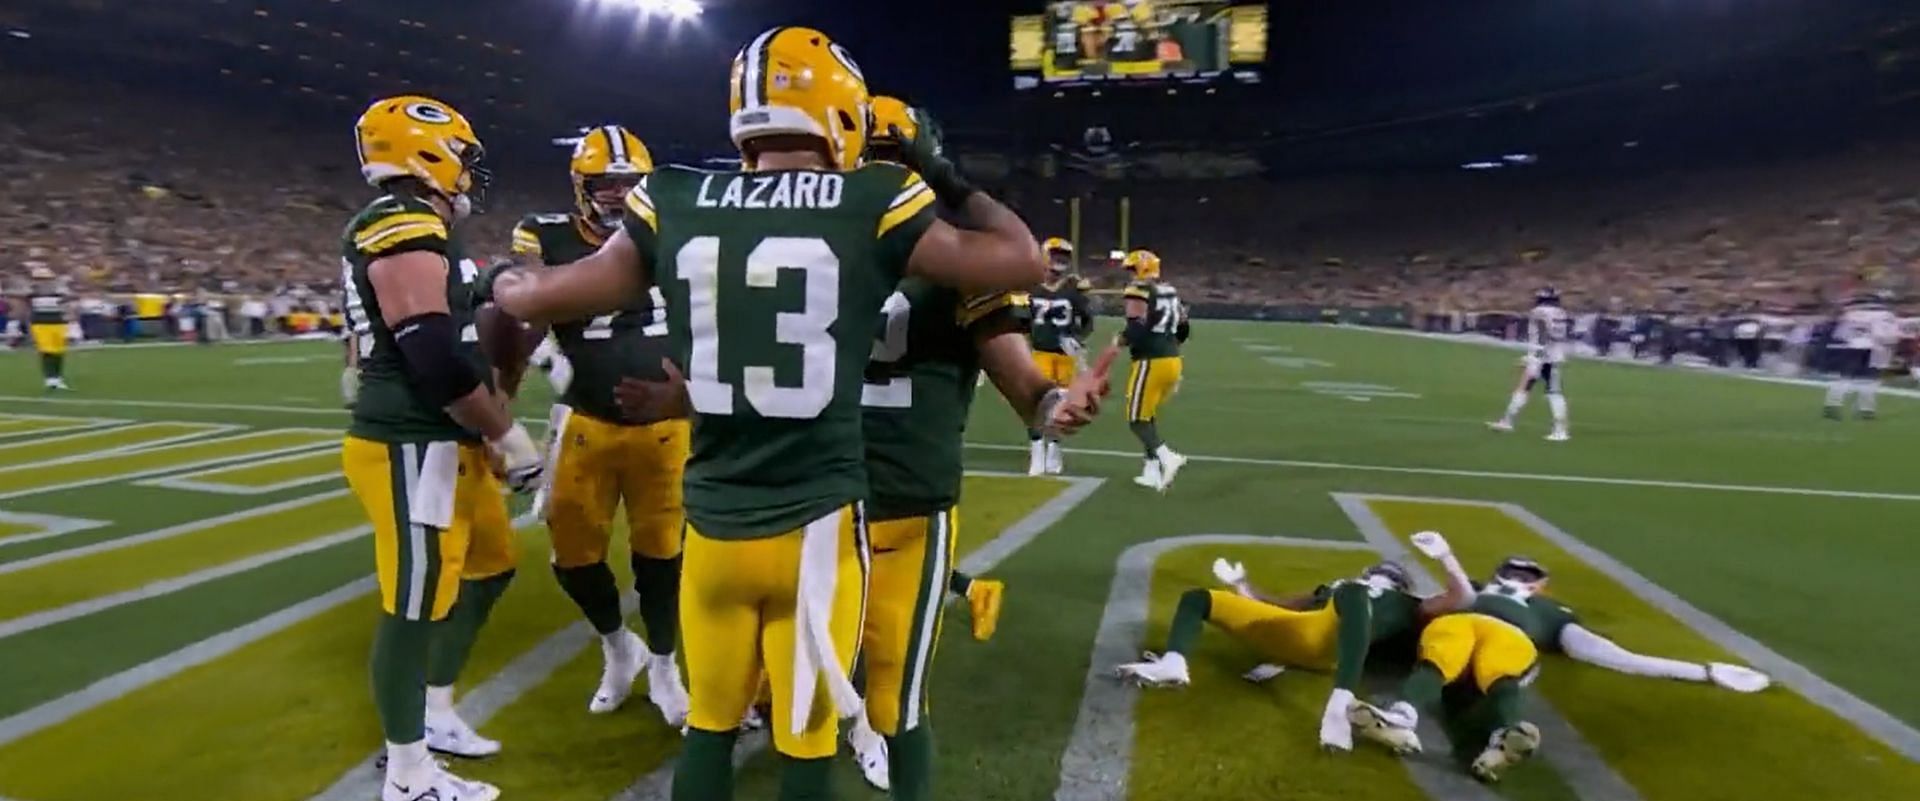 The Packers touchdown celebration against the Bears.